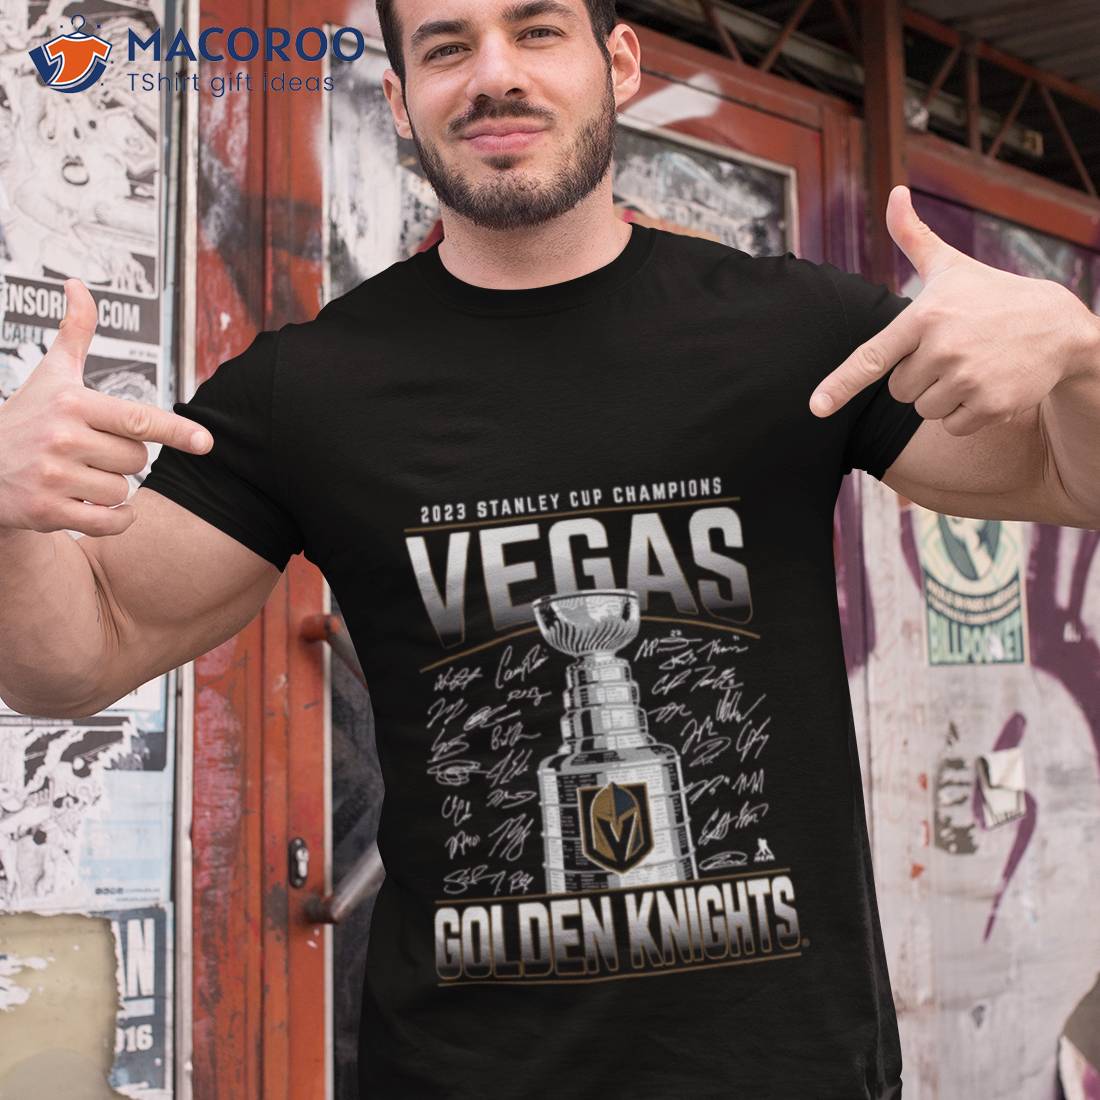 https://images.macoroo.com/wp-content/uploads/2023/06/vegas-golden-knights-2023-stanley-cup-champions-signature-roster-t-shirt-tshirt-1.jpg